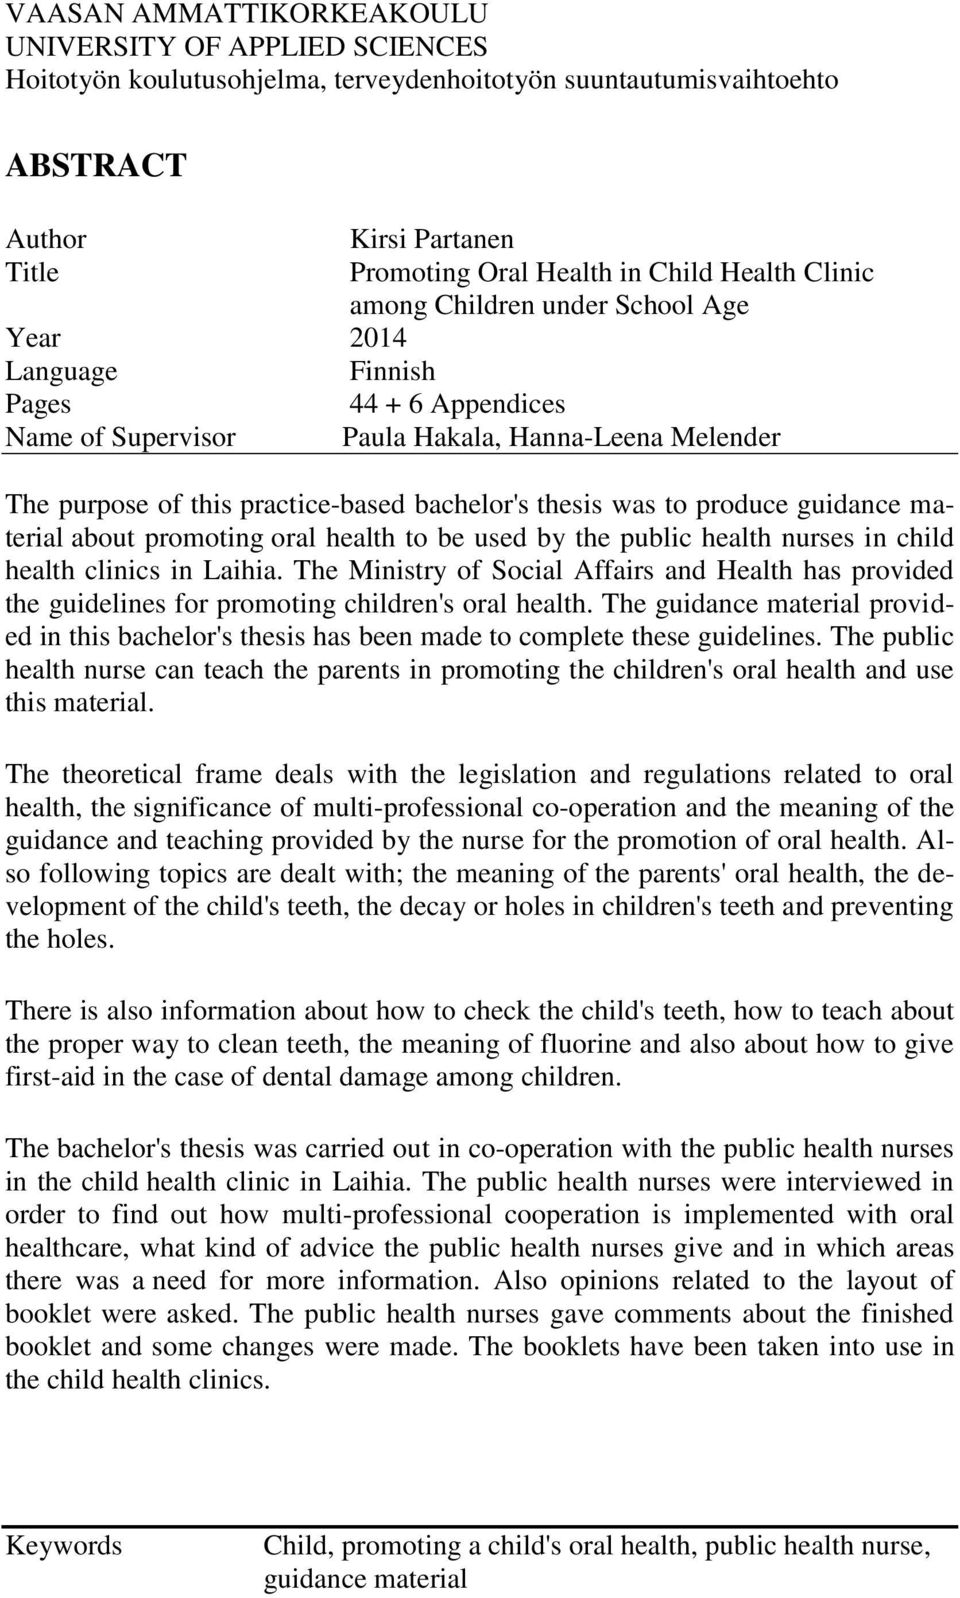 thesis was to produce guidance material about promoting oral health to be used by the public health nurses in child health clinics in Laihia.